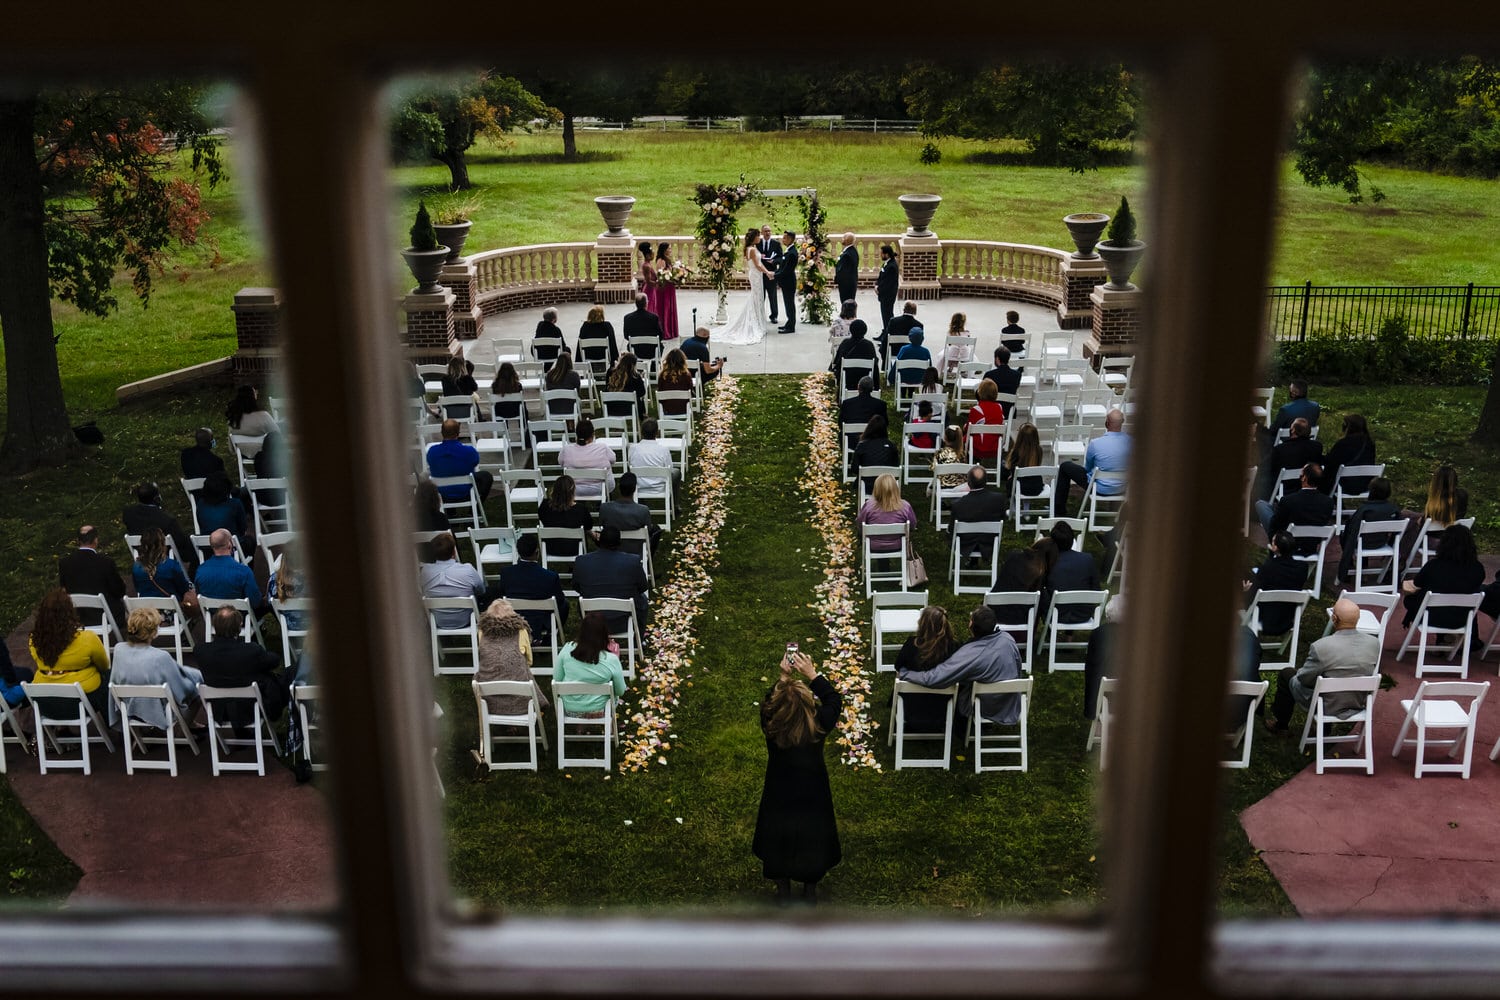 A colorful picture taken through a window of a weedding ceremony taking place on the lawn of Longview Mansion in Kansas City. 